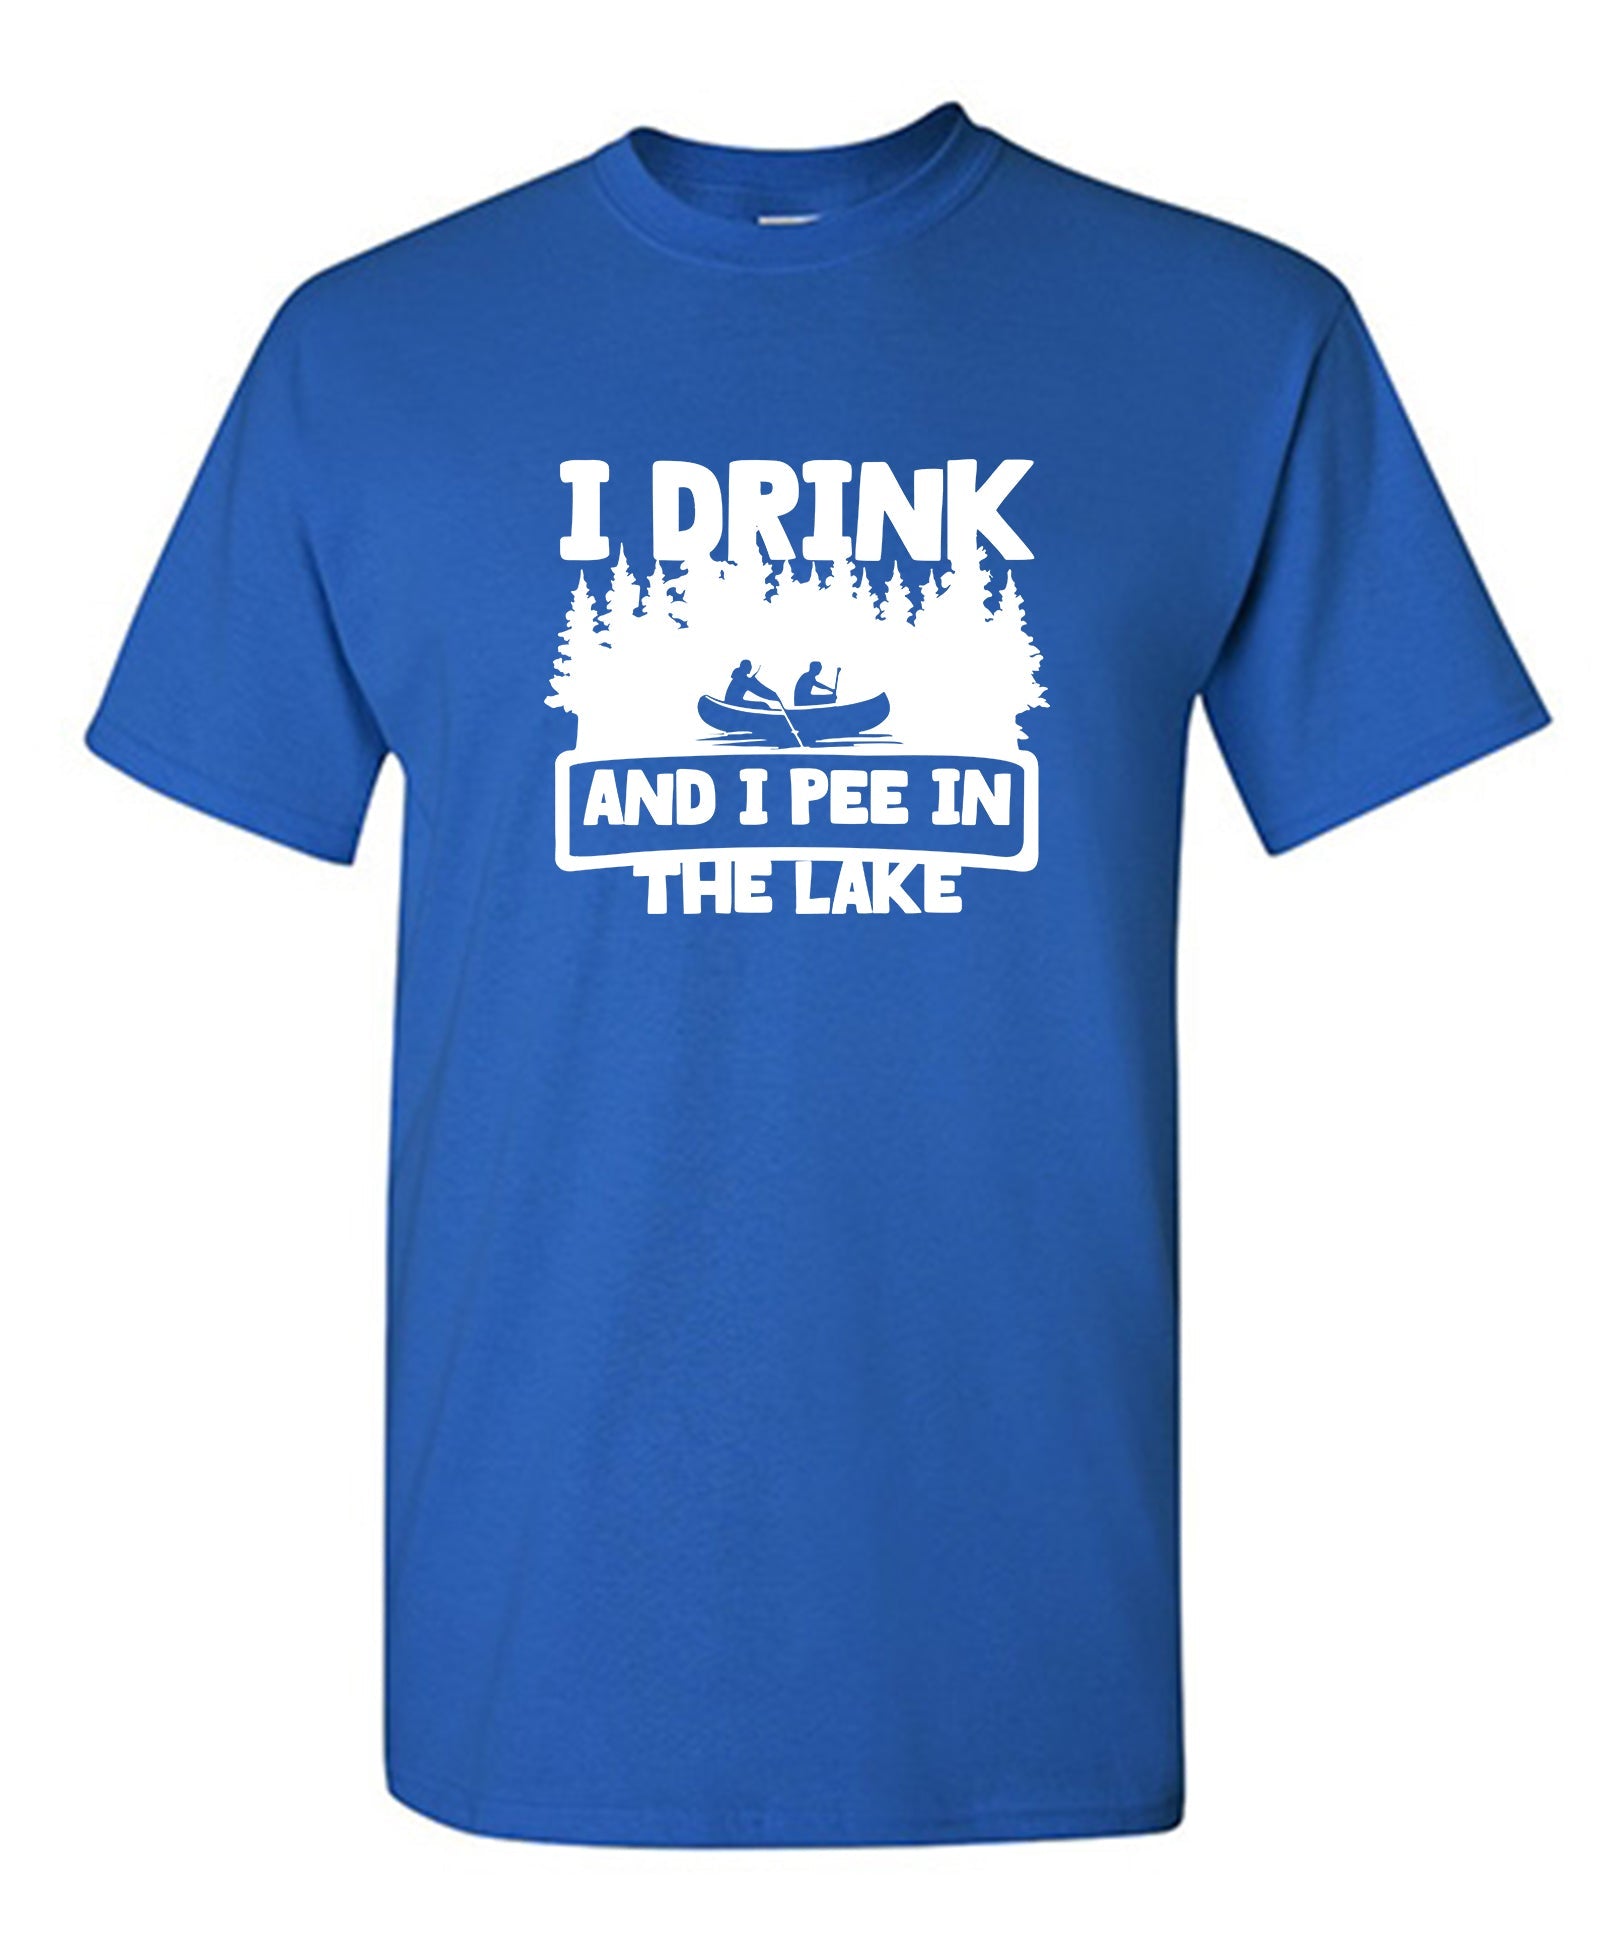 Smells like Day Drinking - Fun Graphic Tees